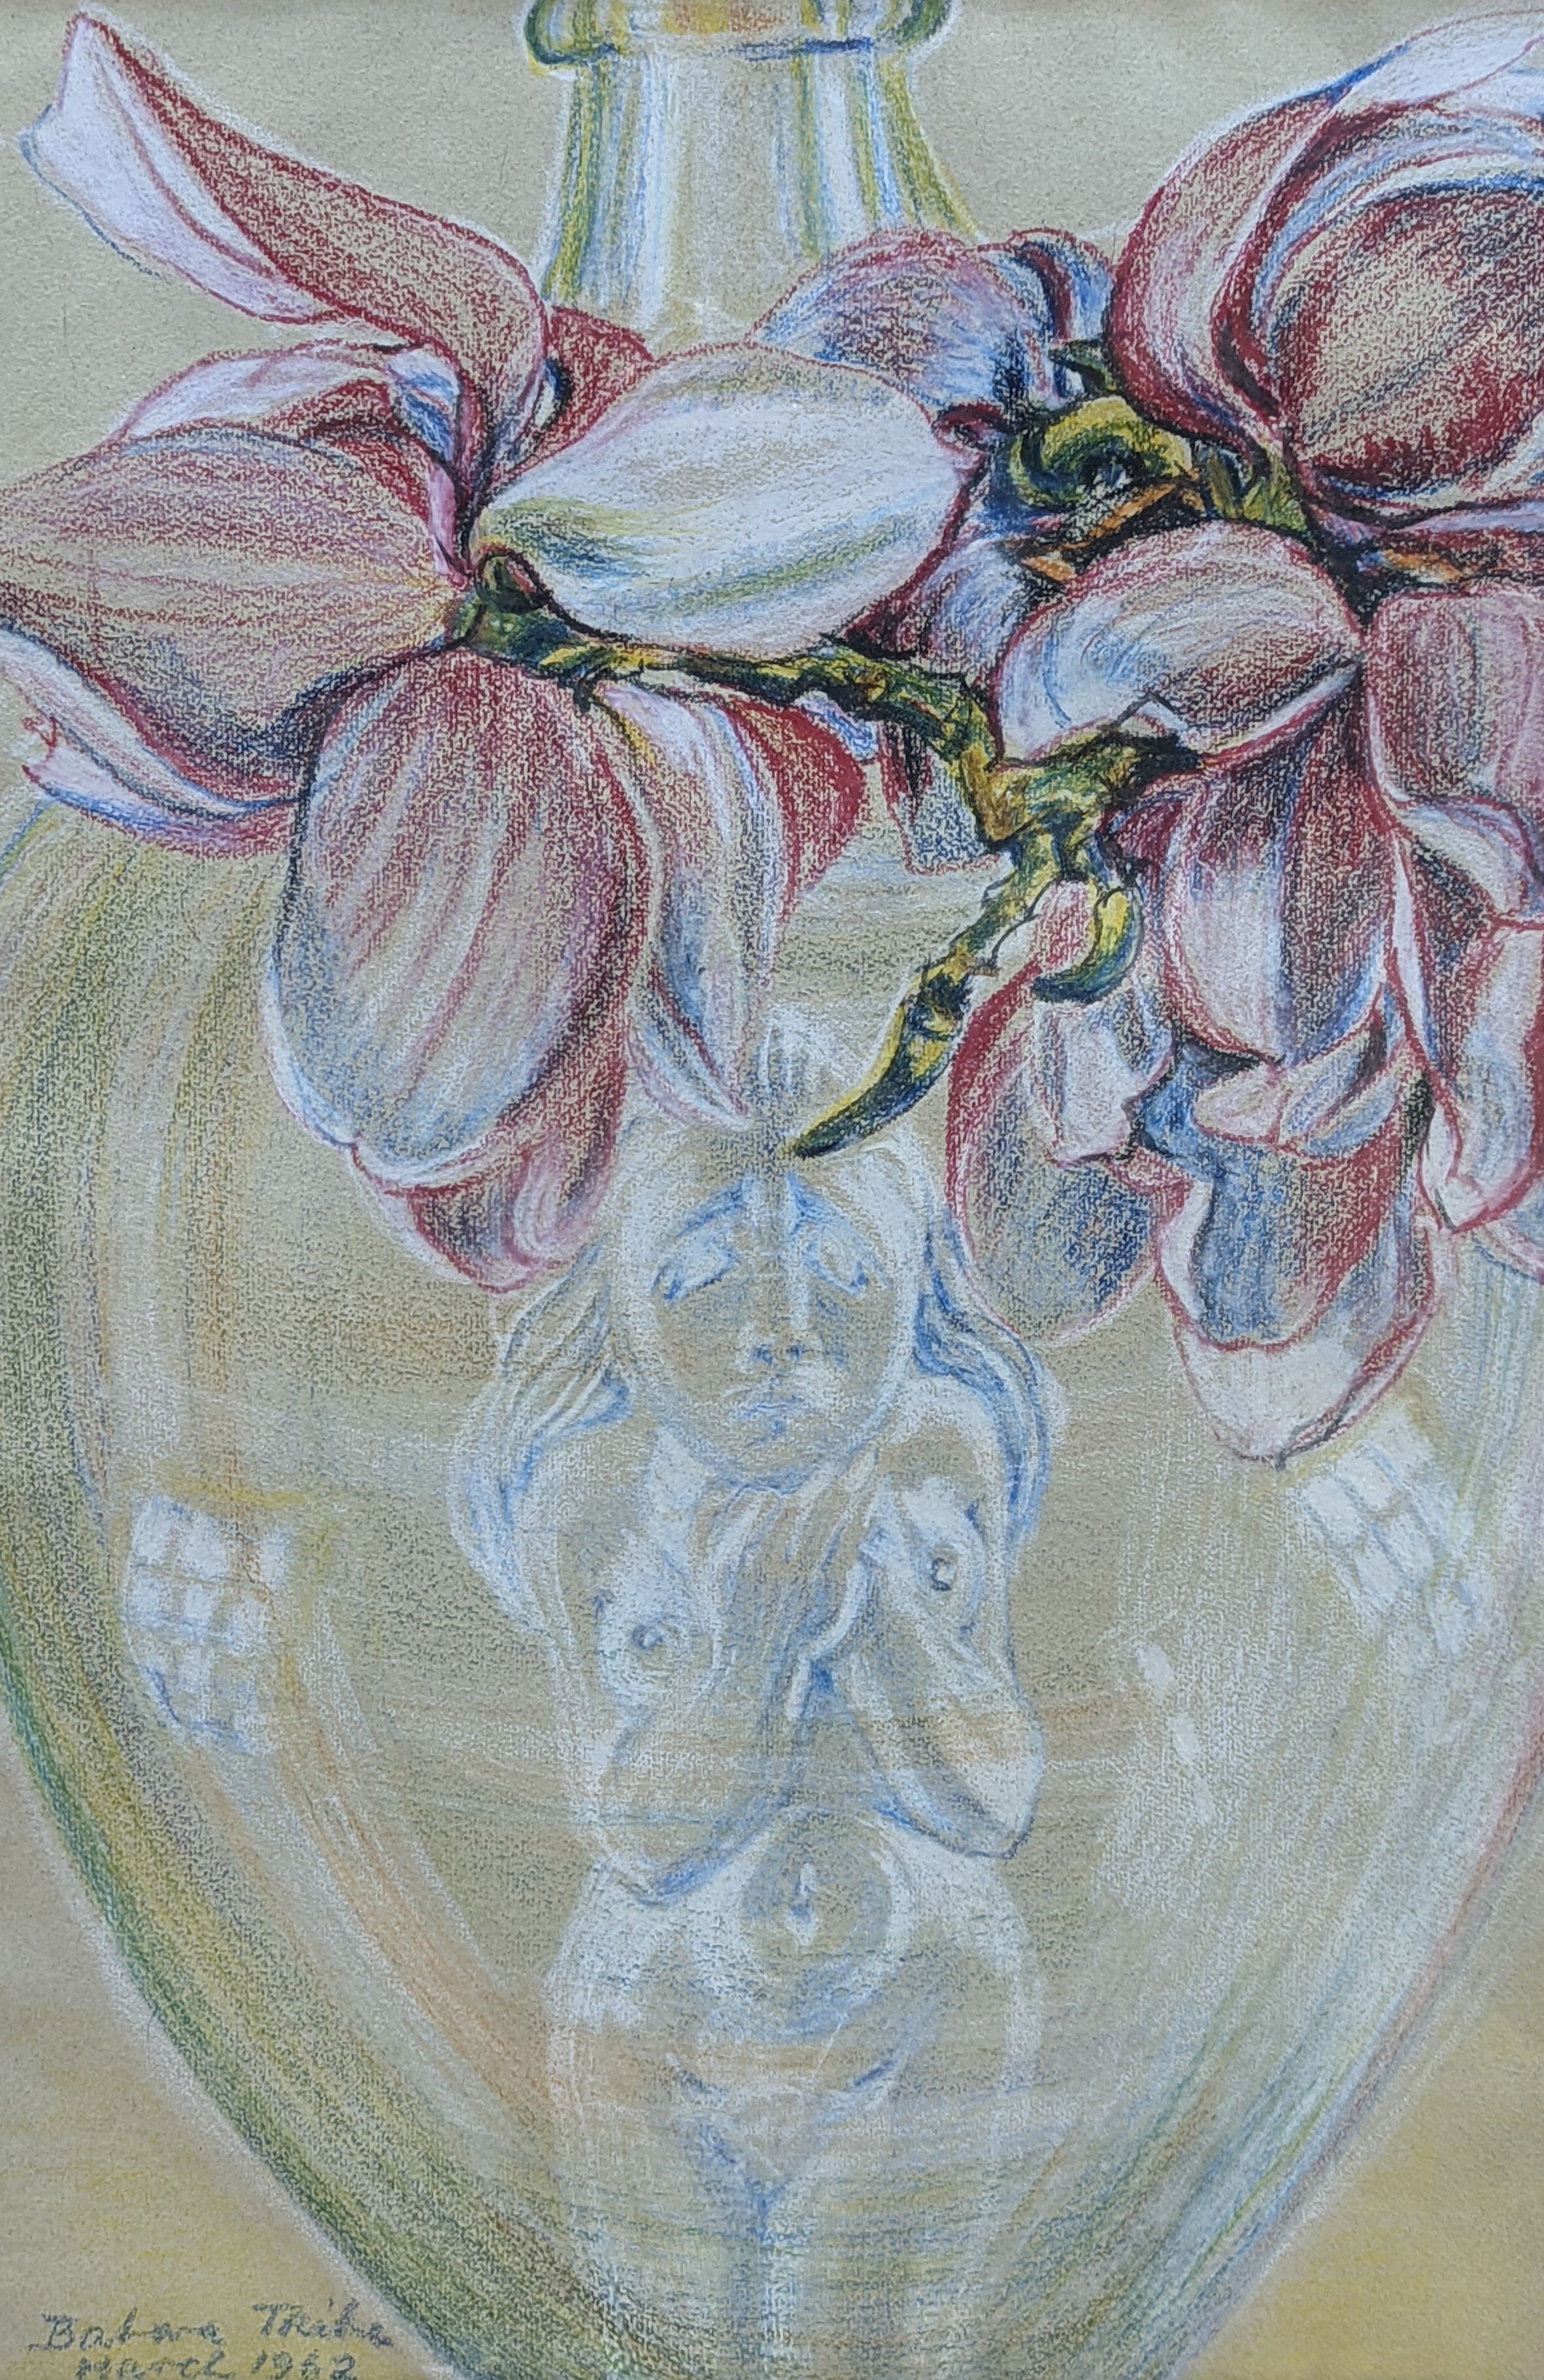 Barbara Tribe (1913-2000), coloured crayons, Study of magnolia, signed and dated 1962, 55 x 37cm